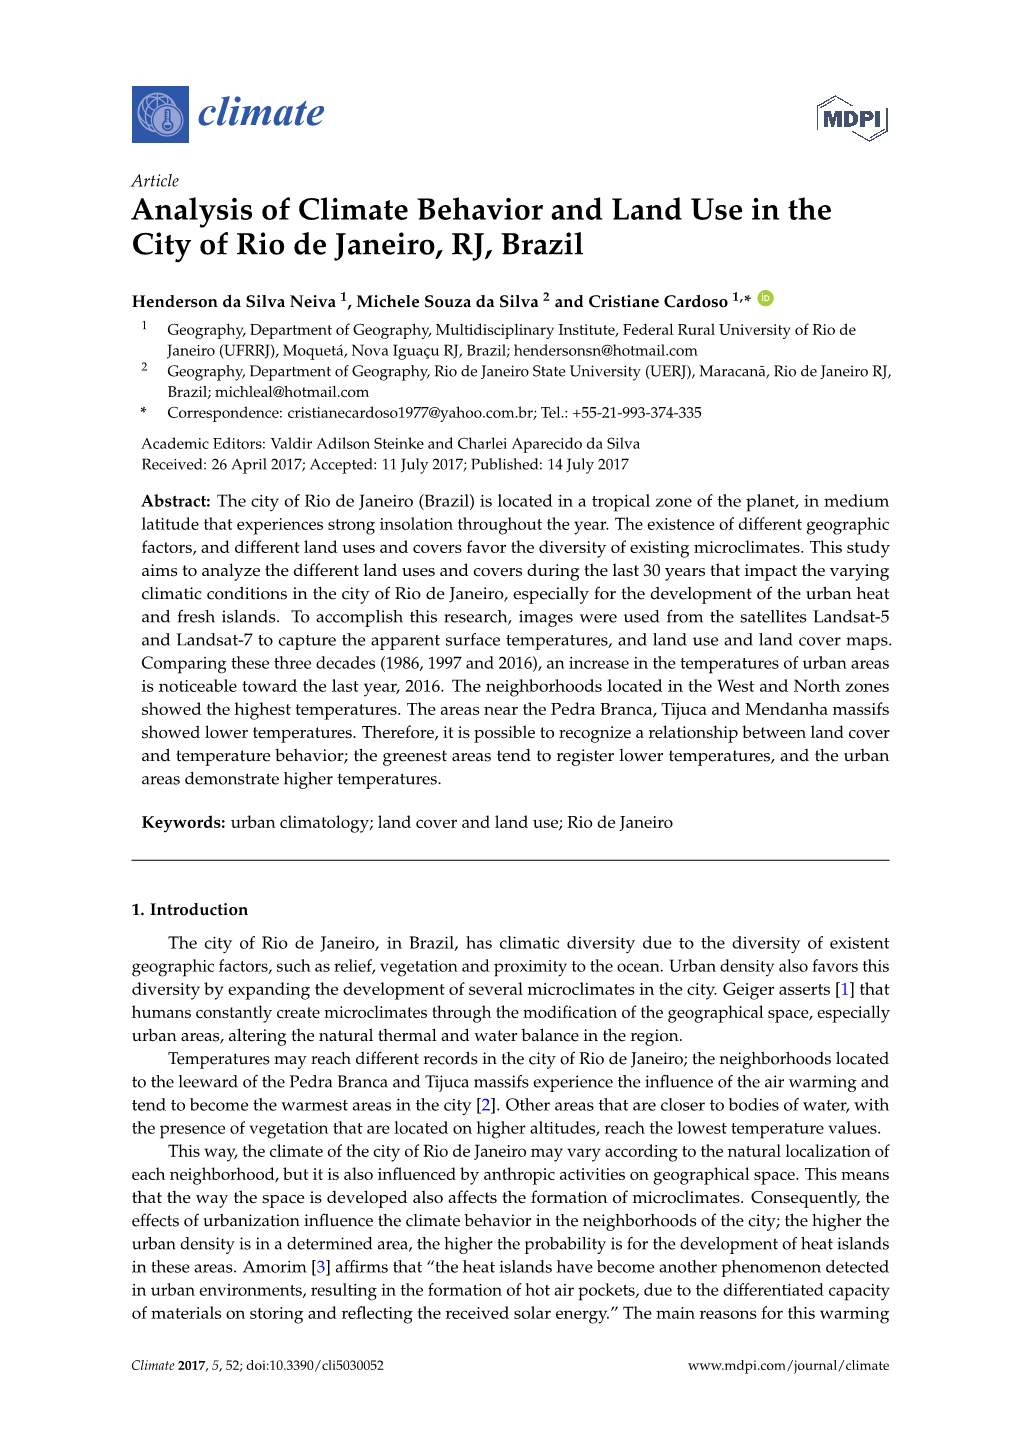 Analysis of Climate Behavior and Land Use in the City of Rio De Janeiro, RJ, Brazil